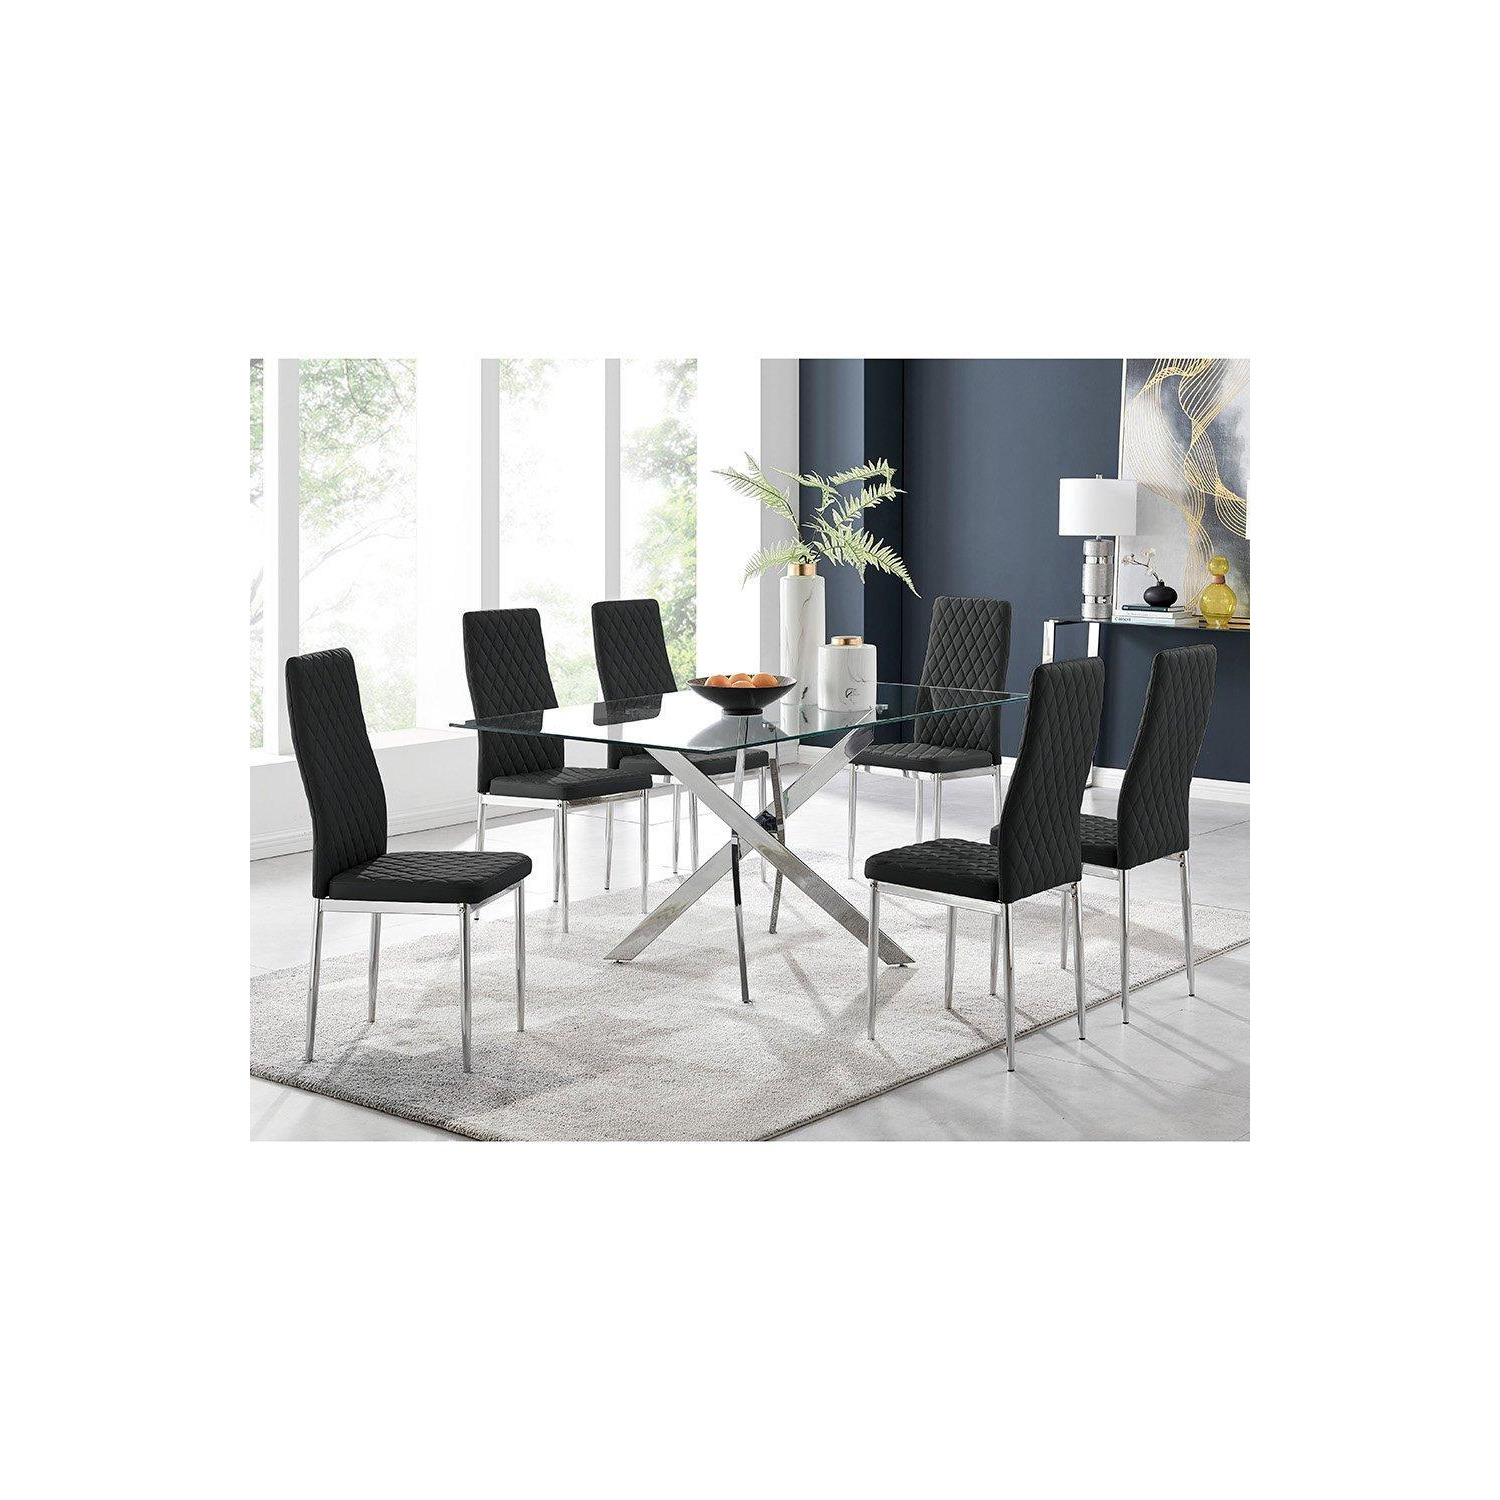 Leonardo Glass And Chrome Metal Dining Table And 6 Milan Chairs Dining Set - image 1